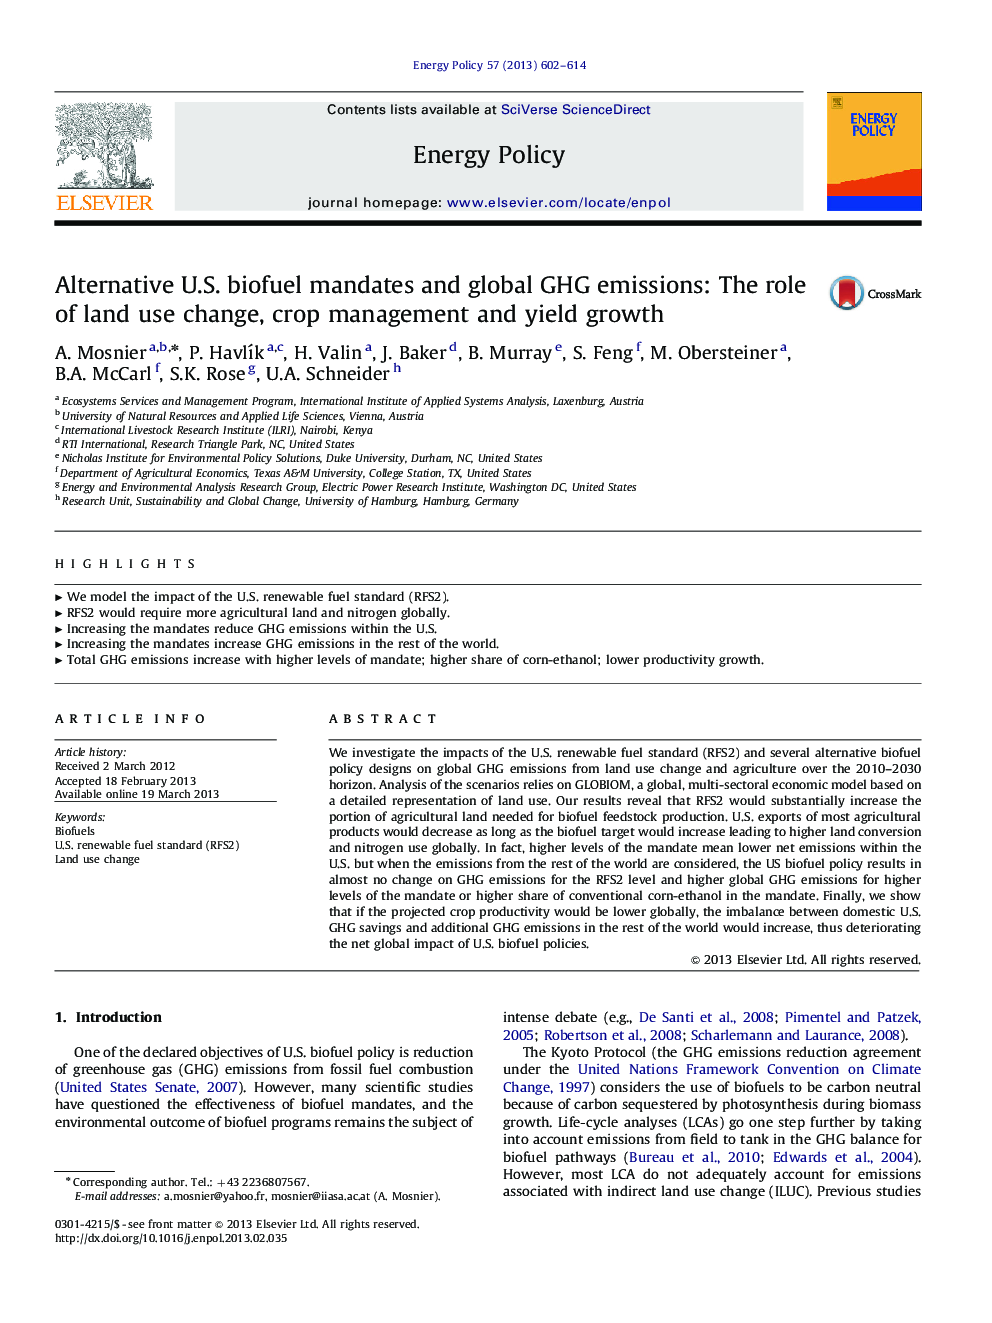 Alternative U.S. biofuel mandates and global GHG emissions: The role of land use change, crop management and yield growth